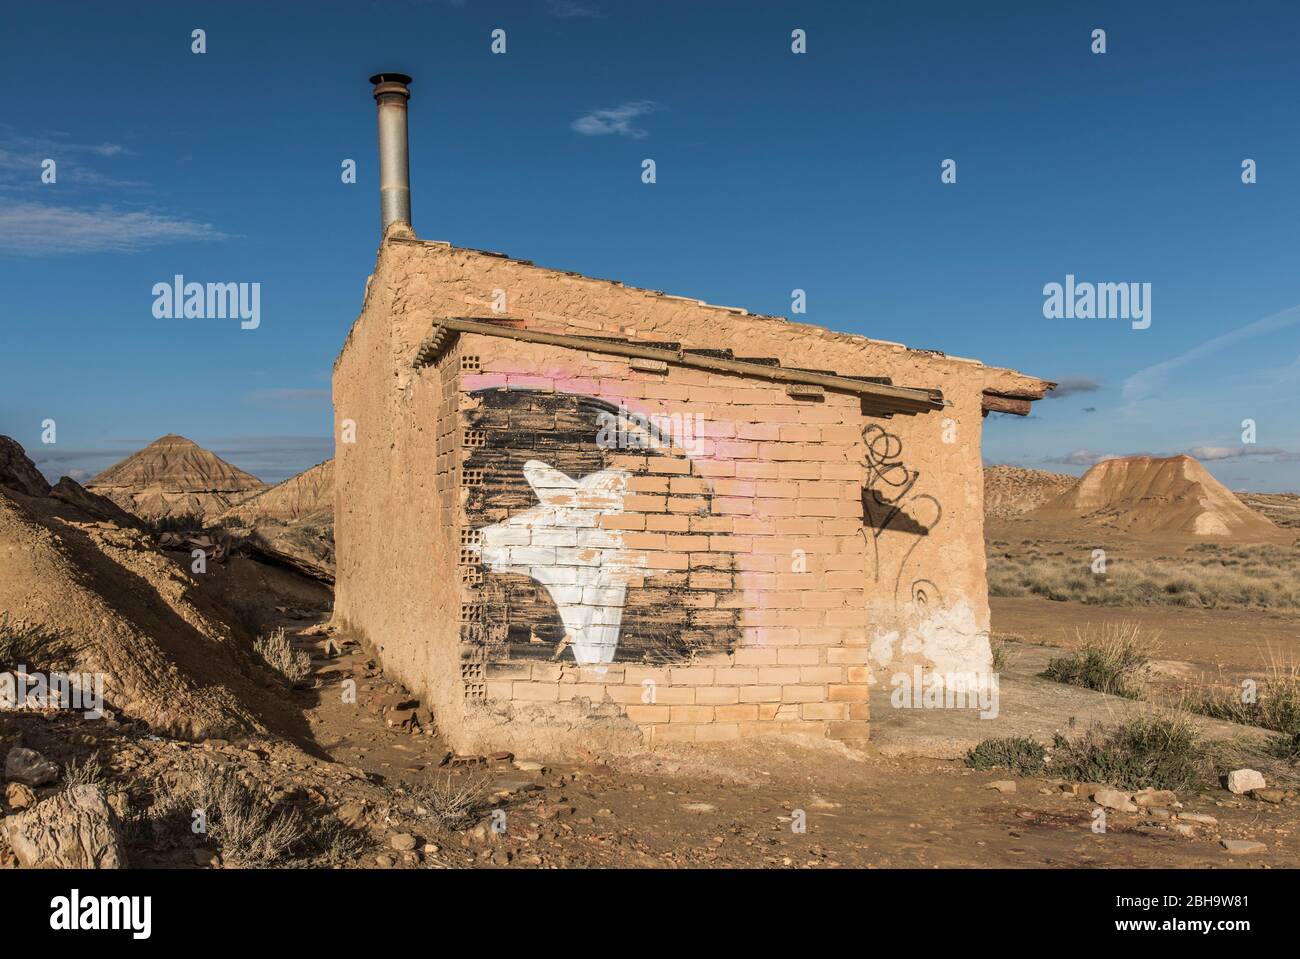 Roadtrip in winter through the semi-desert Bardenas Reales, Navarra, Spain. A UNESCO Biosphere Reserve with among others Castil de Tierra, Pisquerra Mountains and Bardena Blanca. Refuge for shepherd with grafitti. Stock Photo